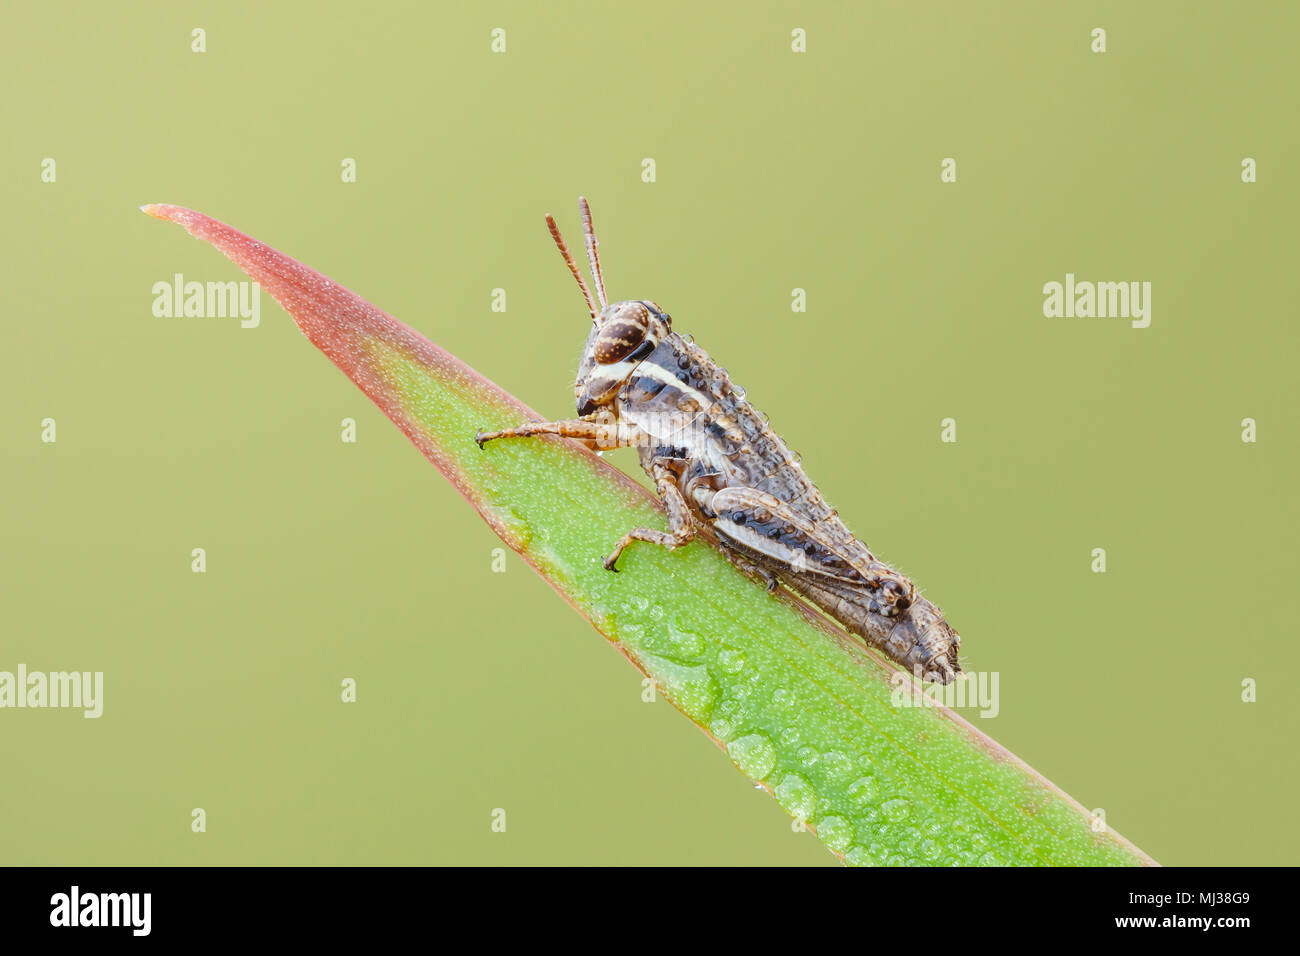 A dew-covered Spur-throated Grasshopper (Paroxya sp.) nymph perches on a blade of grass in the cool air of early morning. Stock Photo